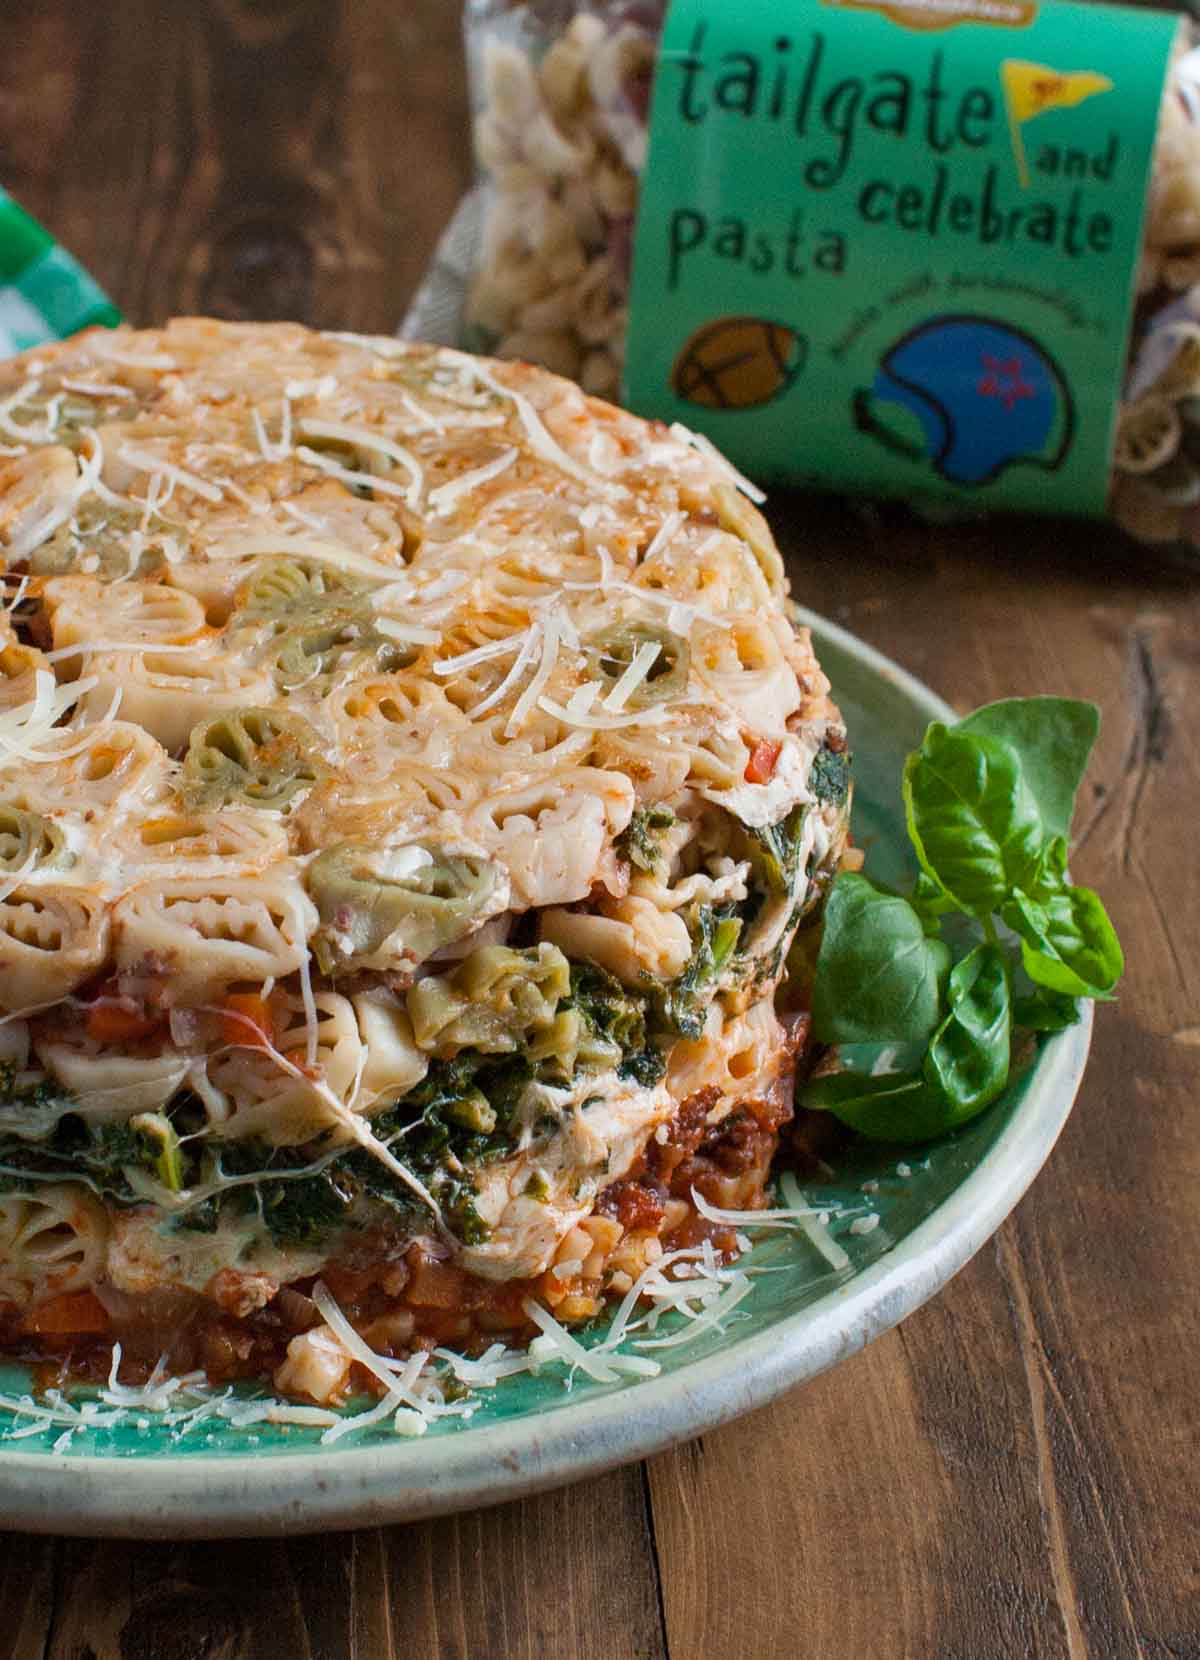 Tailgate Timballo | WorldofPastabilities.com | Nine layers of fabulous flavors: meat sauce, kale bechamel, fresh cheeses, and pasta. Serve slices during the big games and WOW your guests! Fun with any shaped pasta!